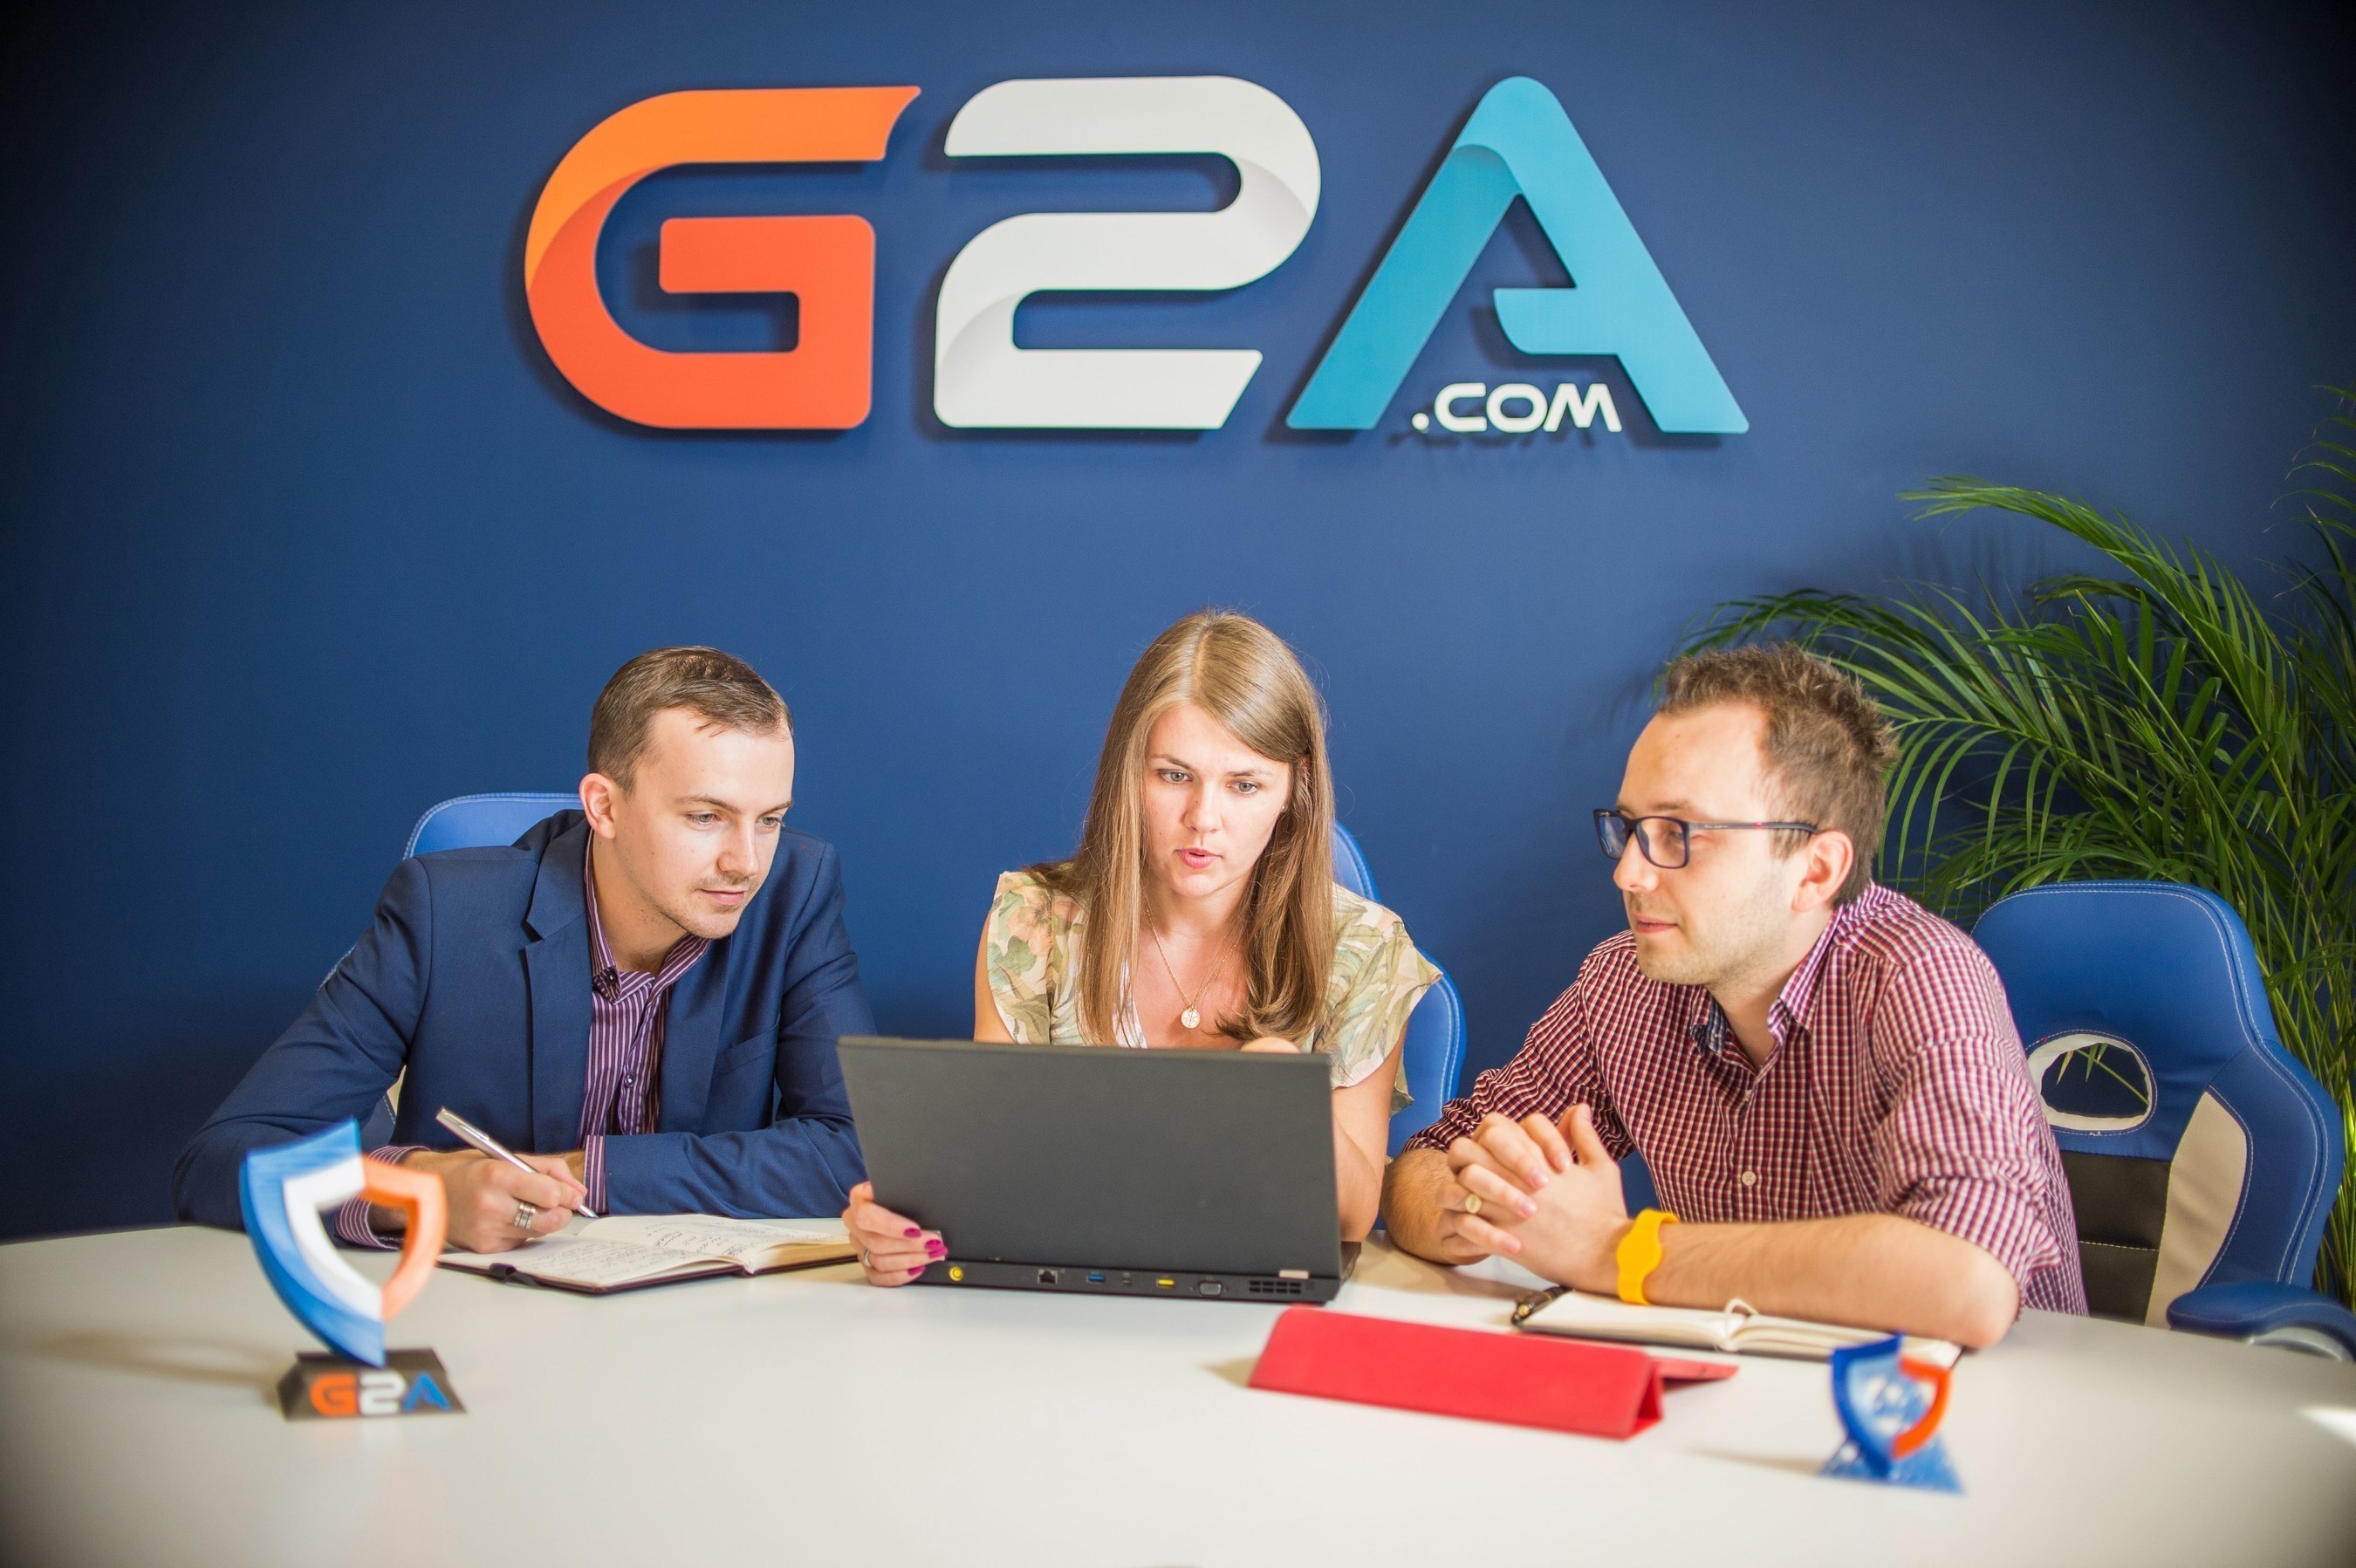 Part of the G2A Team finalizing the front-end verification steps for the G2A Marketplace to tighten security for new sellers. (PRNewsFoto/G2A.com)